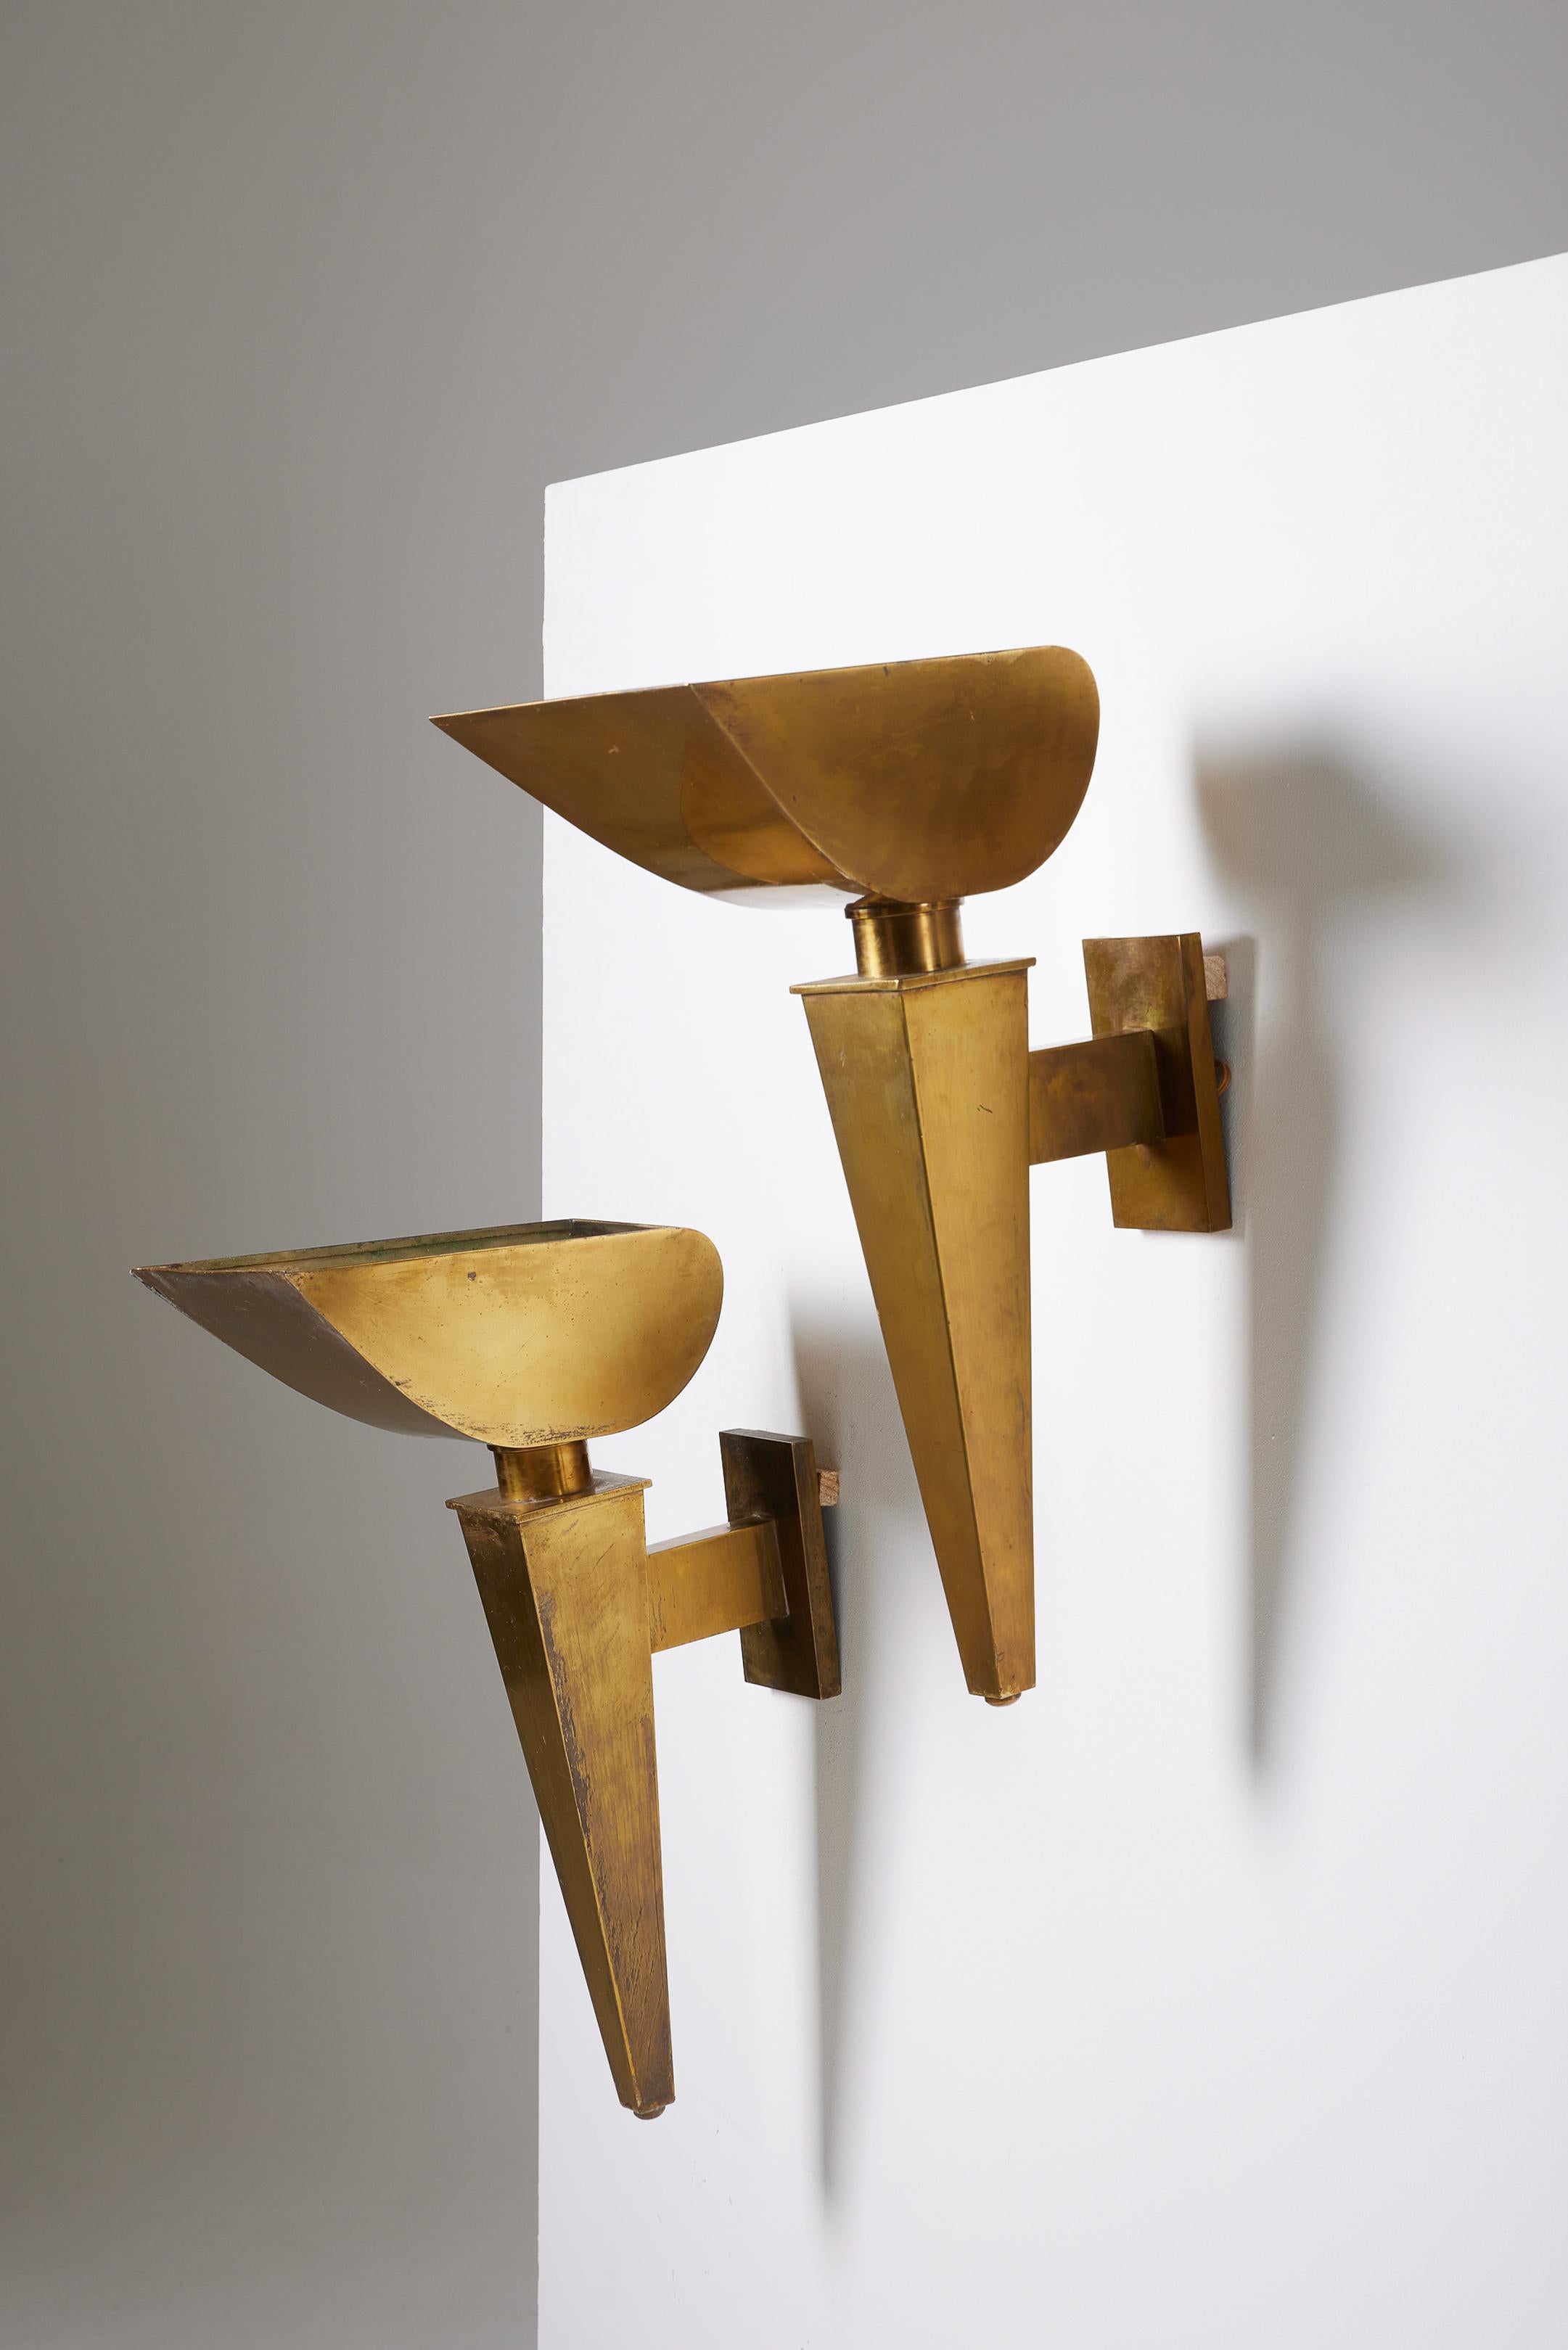 Pair of gilded brass wall sconces by designer Jean-Boris Lacroix (1902-1984), dating back to the 1950s. Jean-Boris Lacroix was a pioneer of modernist design, known for his luminaires with clean geometric lines. Overall very good condition
LP1920